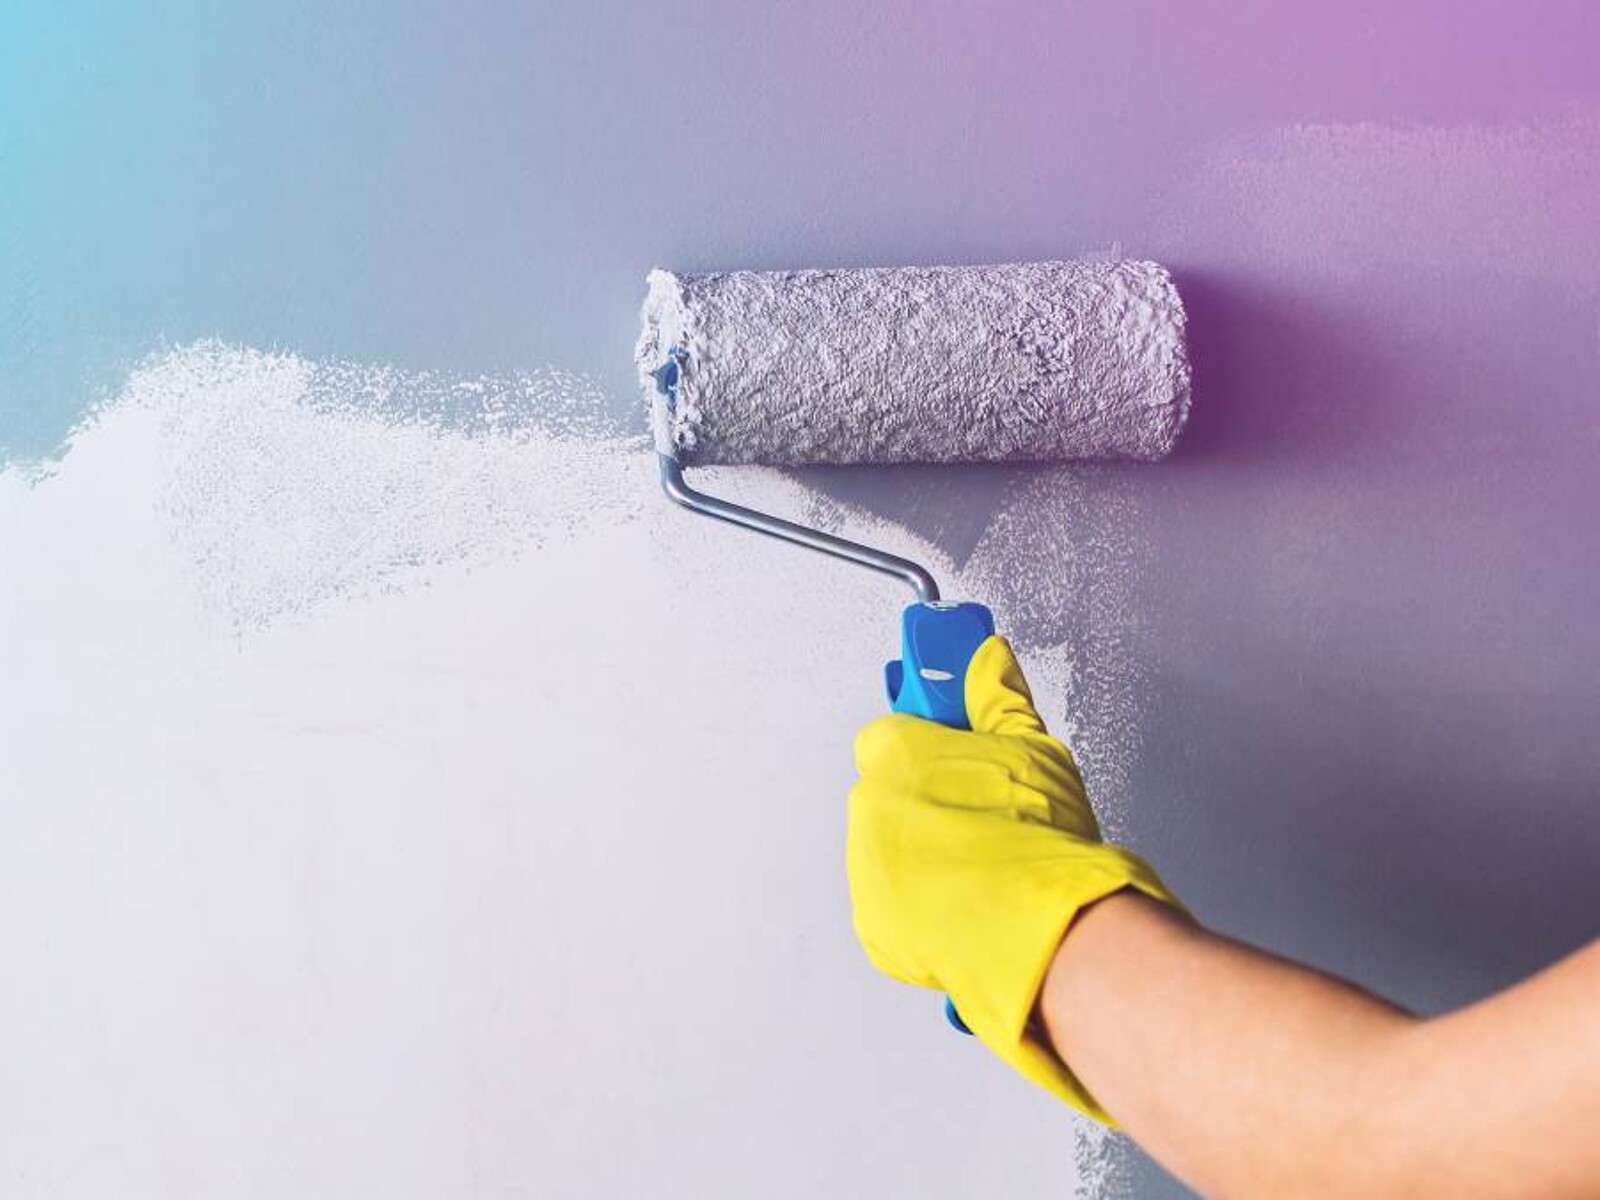 How To Add Texture To Your Walls Using Just A Paint Roller